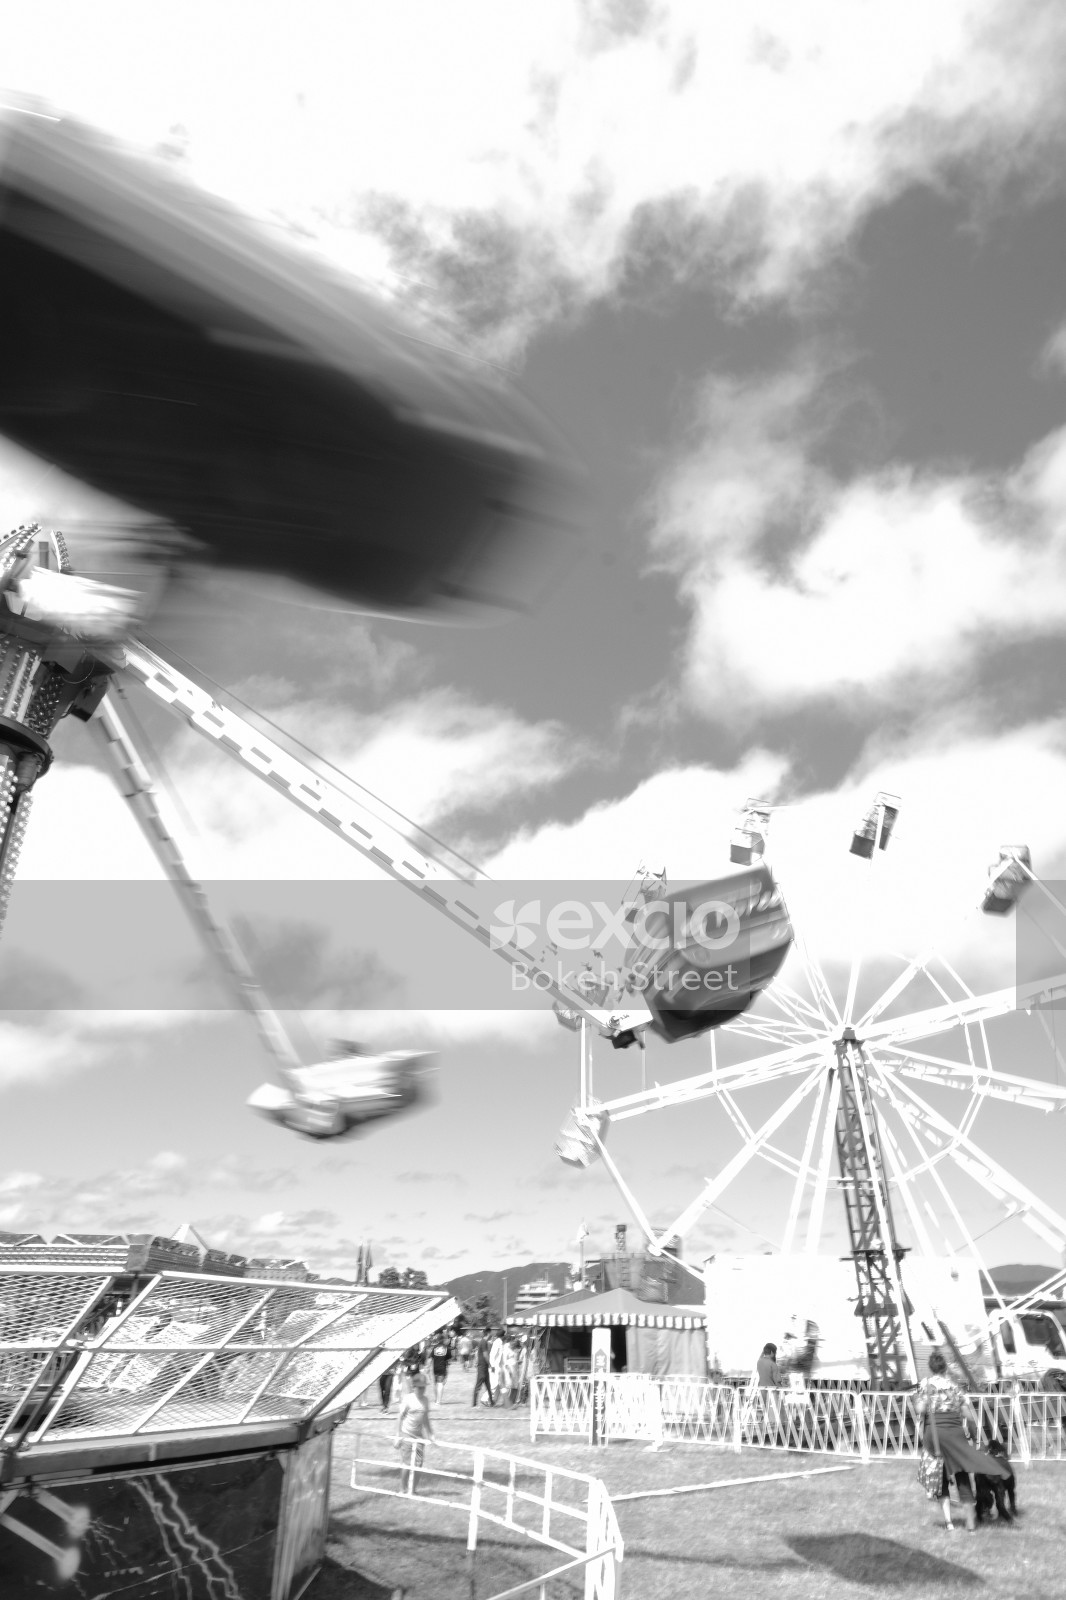 People and rides at a carnival black and white